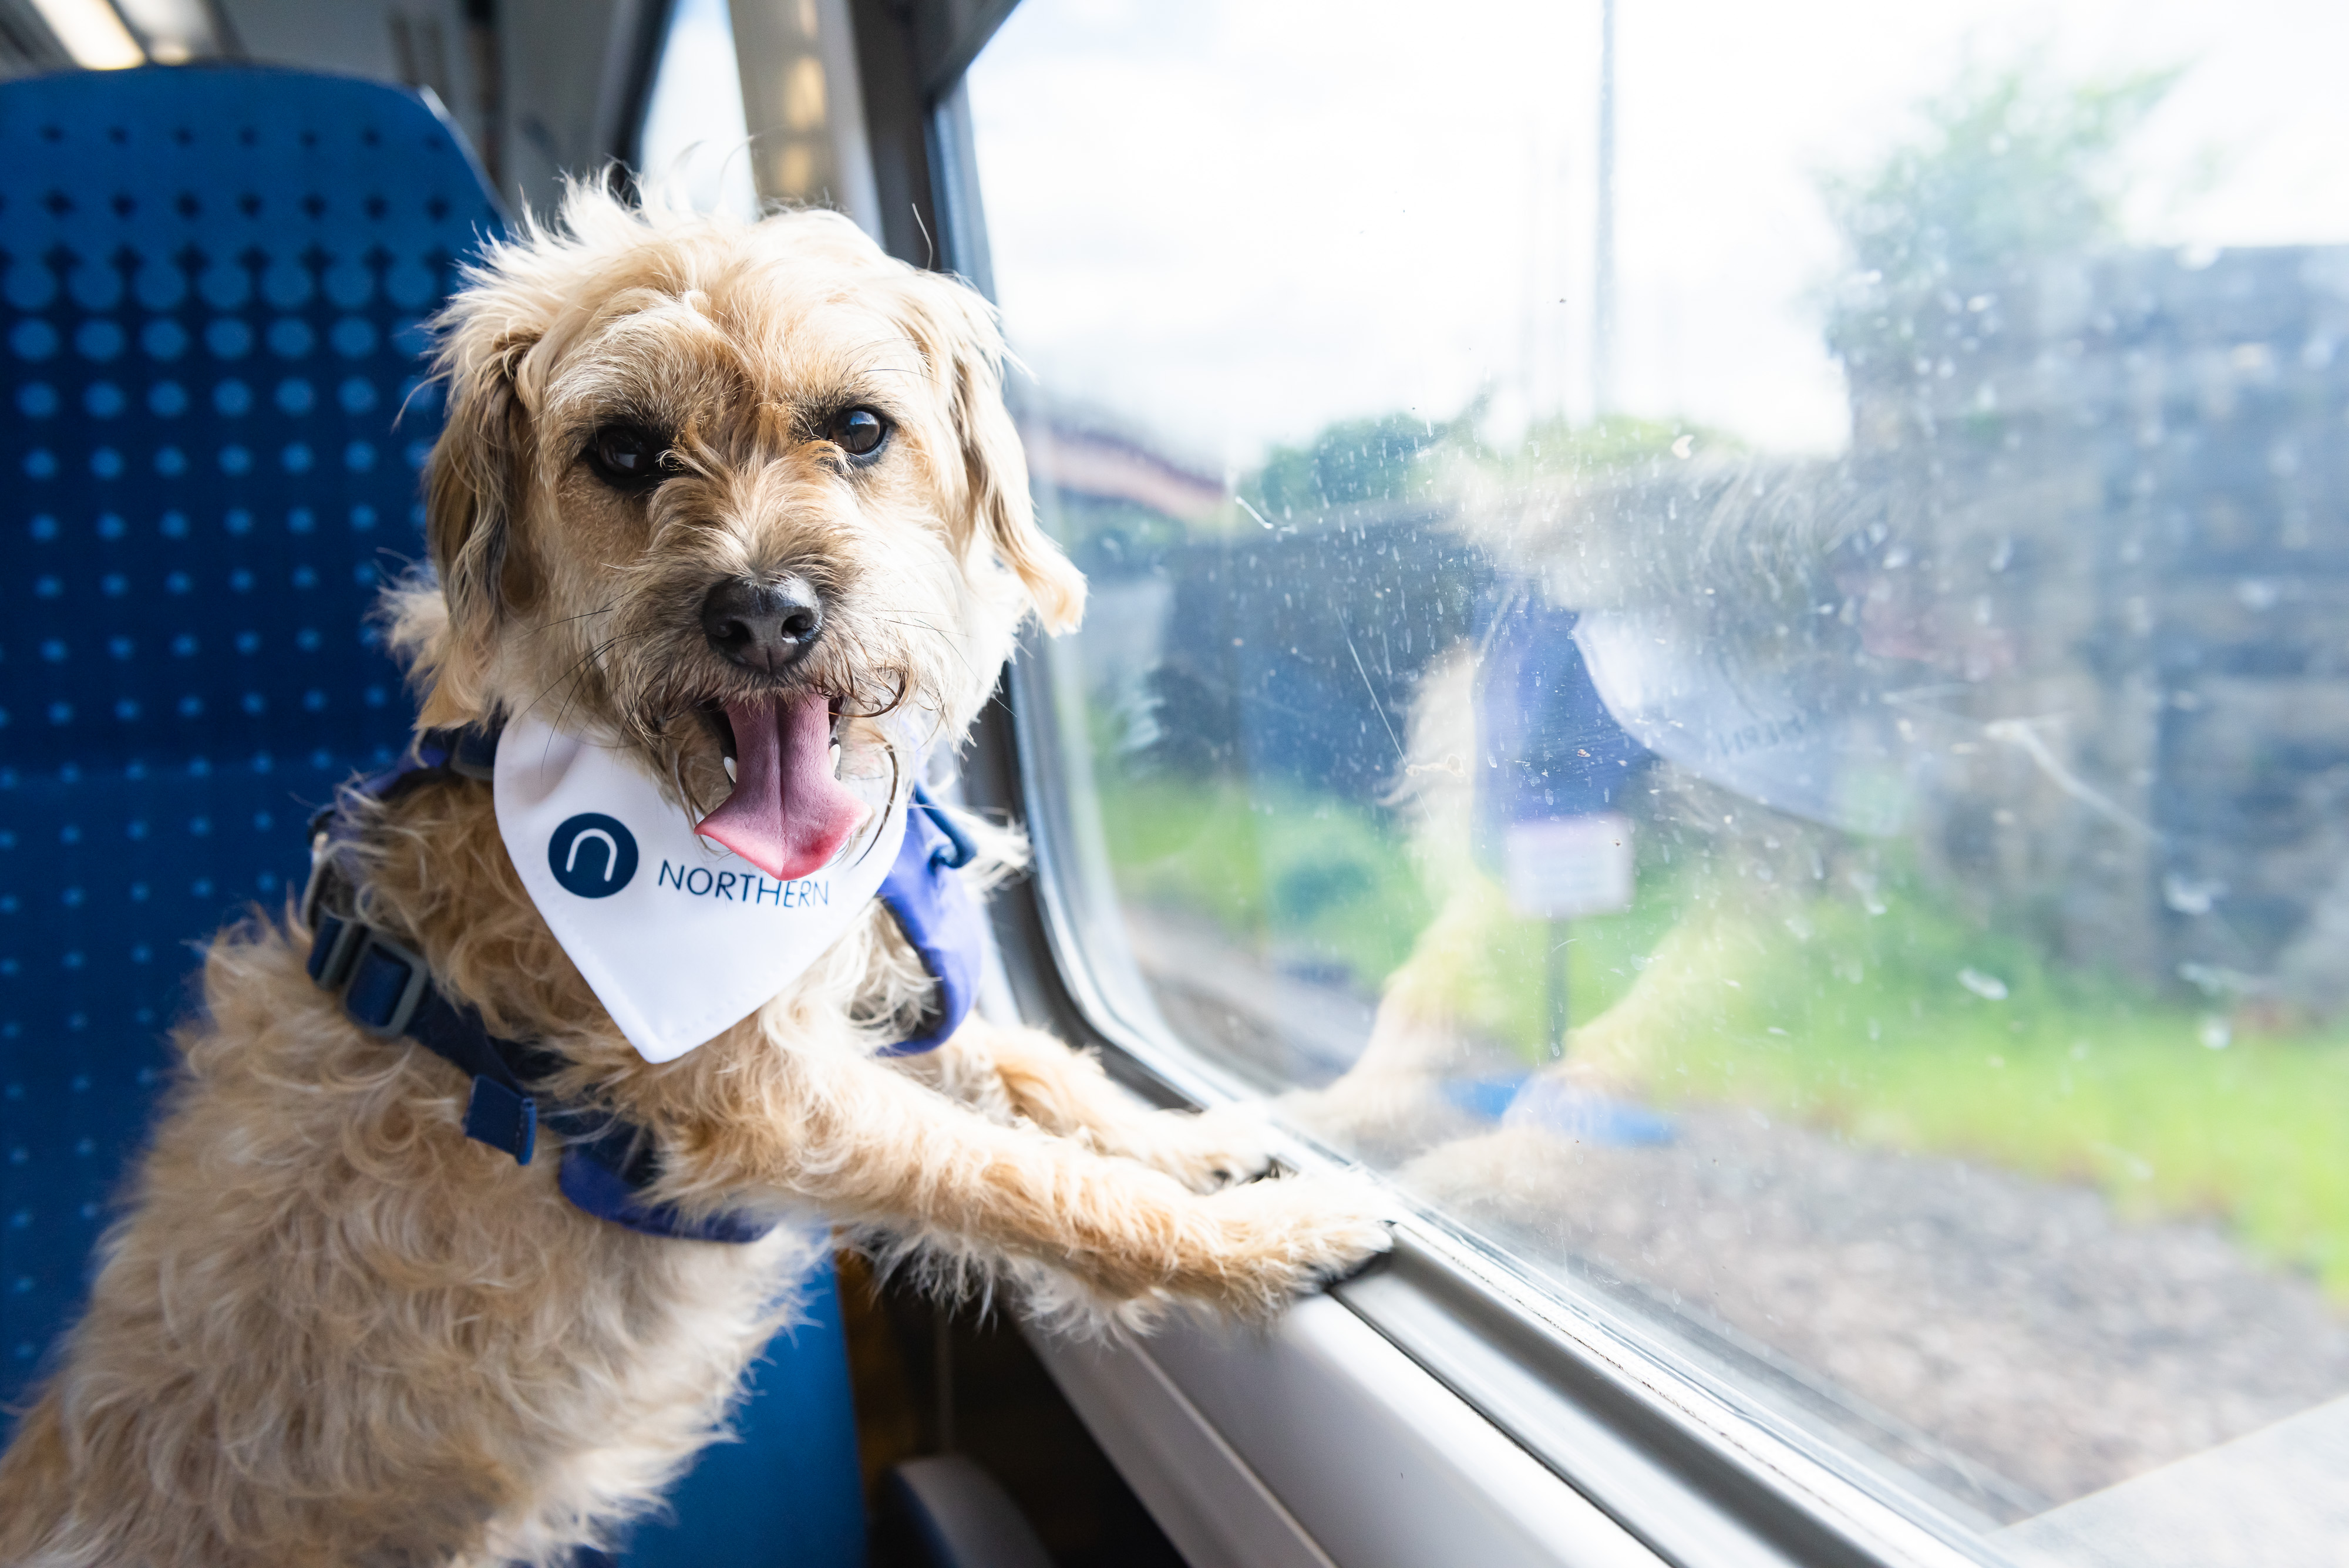 Image of a dog looking out of the window on a train